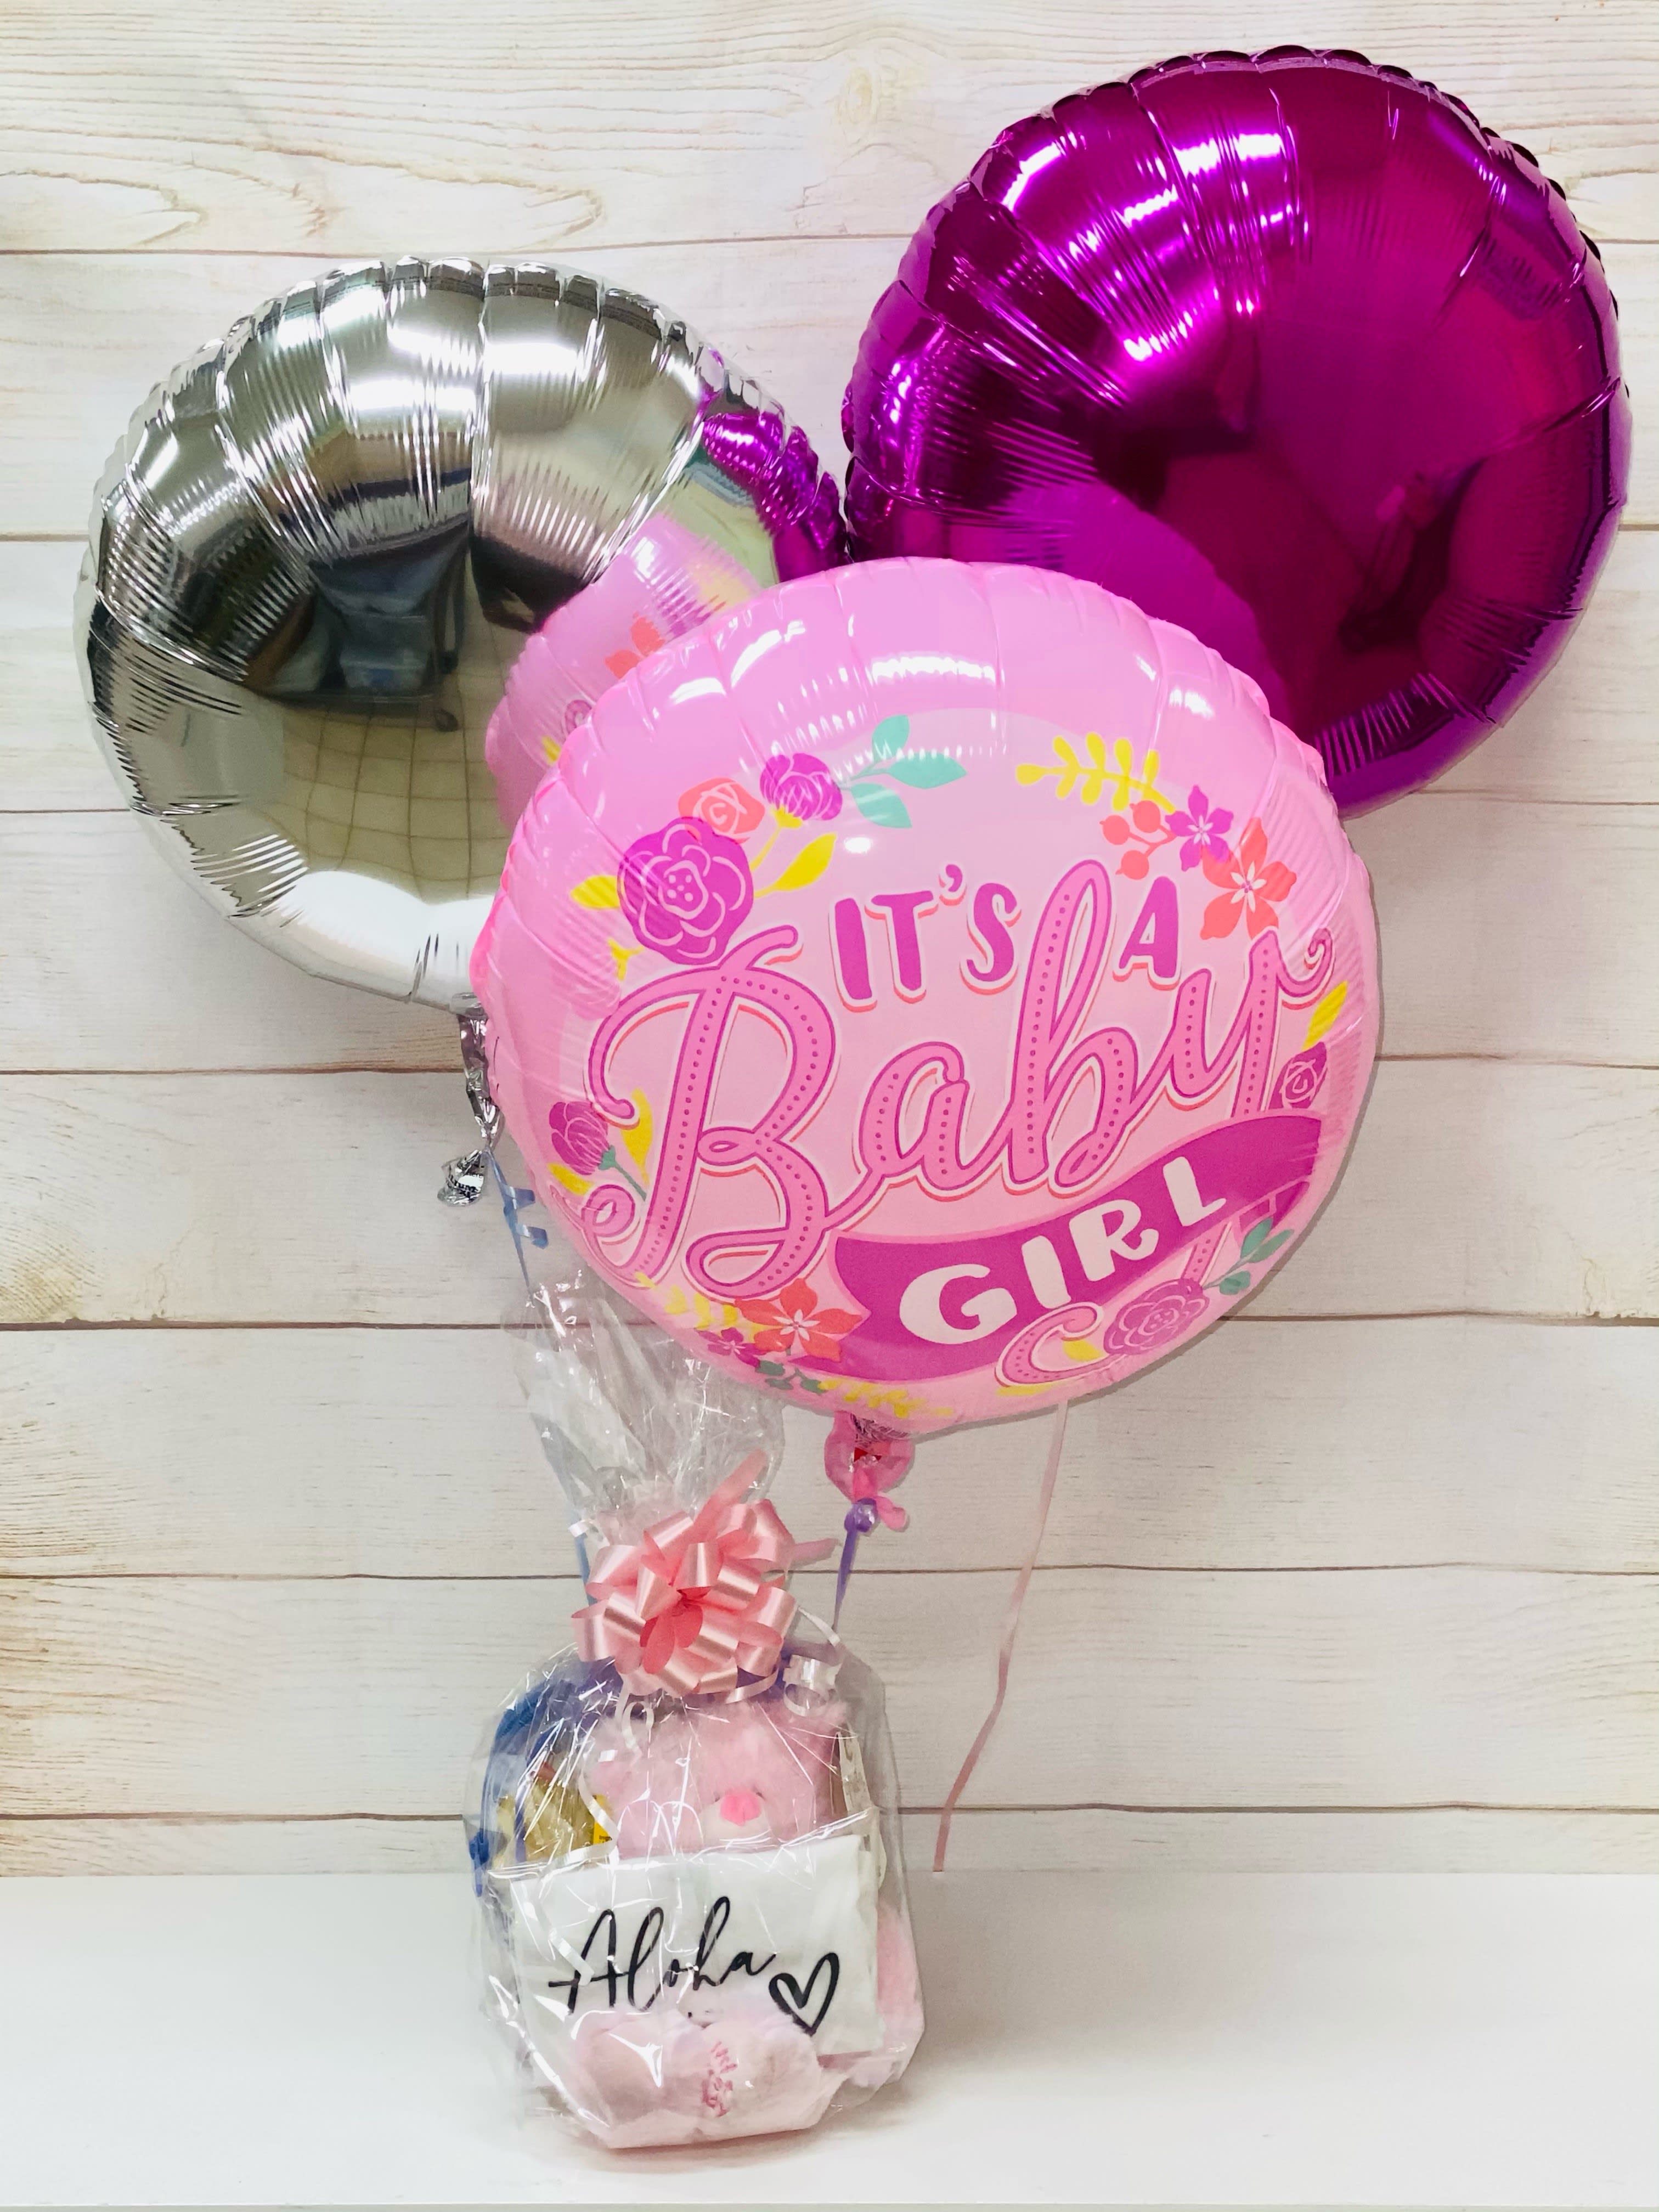 Baby Girl Gift Set (Small) - It’s a Girl! Let’s welcome her with this amazing gift set! Includes a diaper shirt/onesy (unisex), small plush, baby toy OR book, and 3 mylar balloons – balloon and plush subject to change depending on the gender of baby. Items sold individually = $65 retail value.